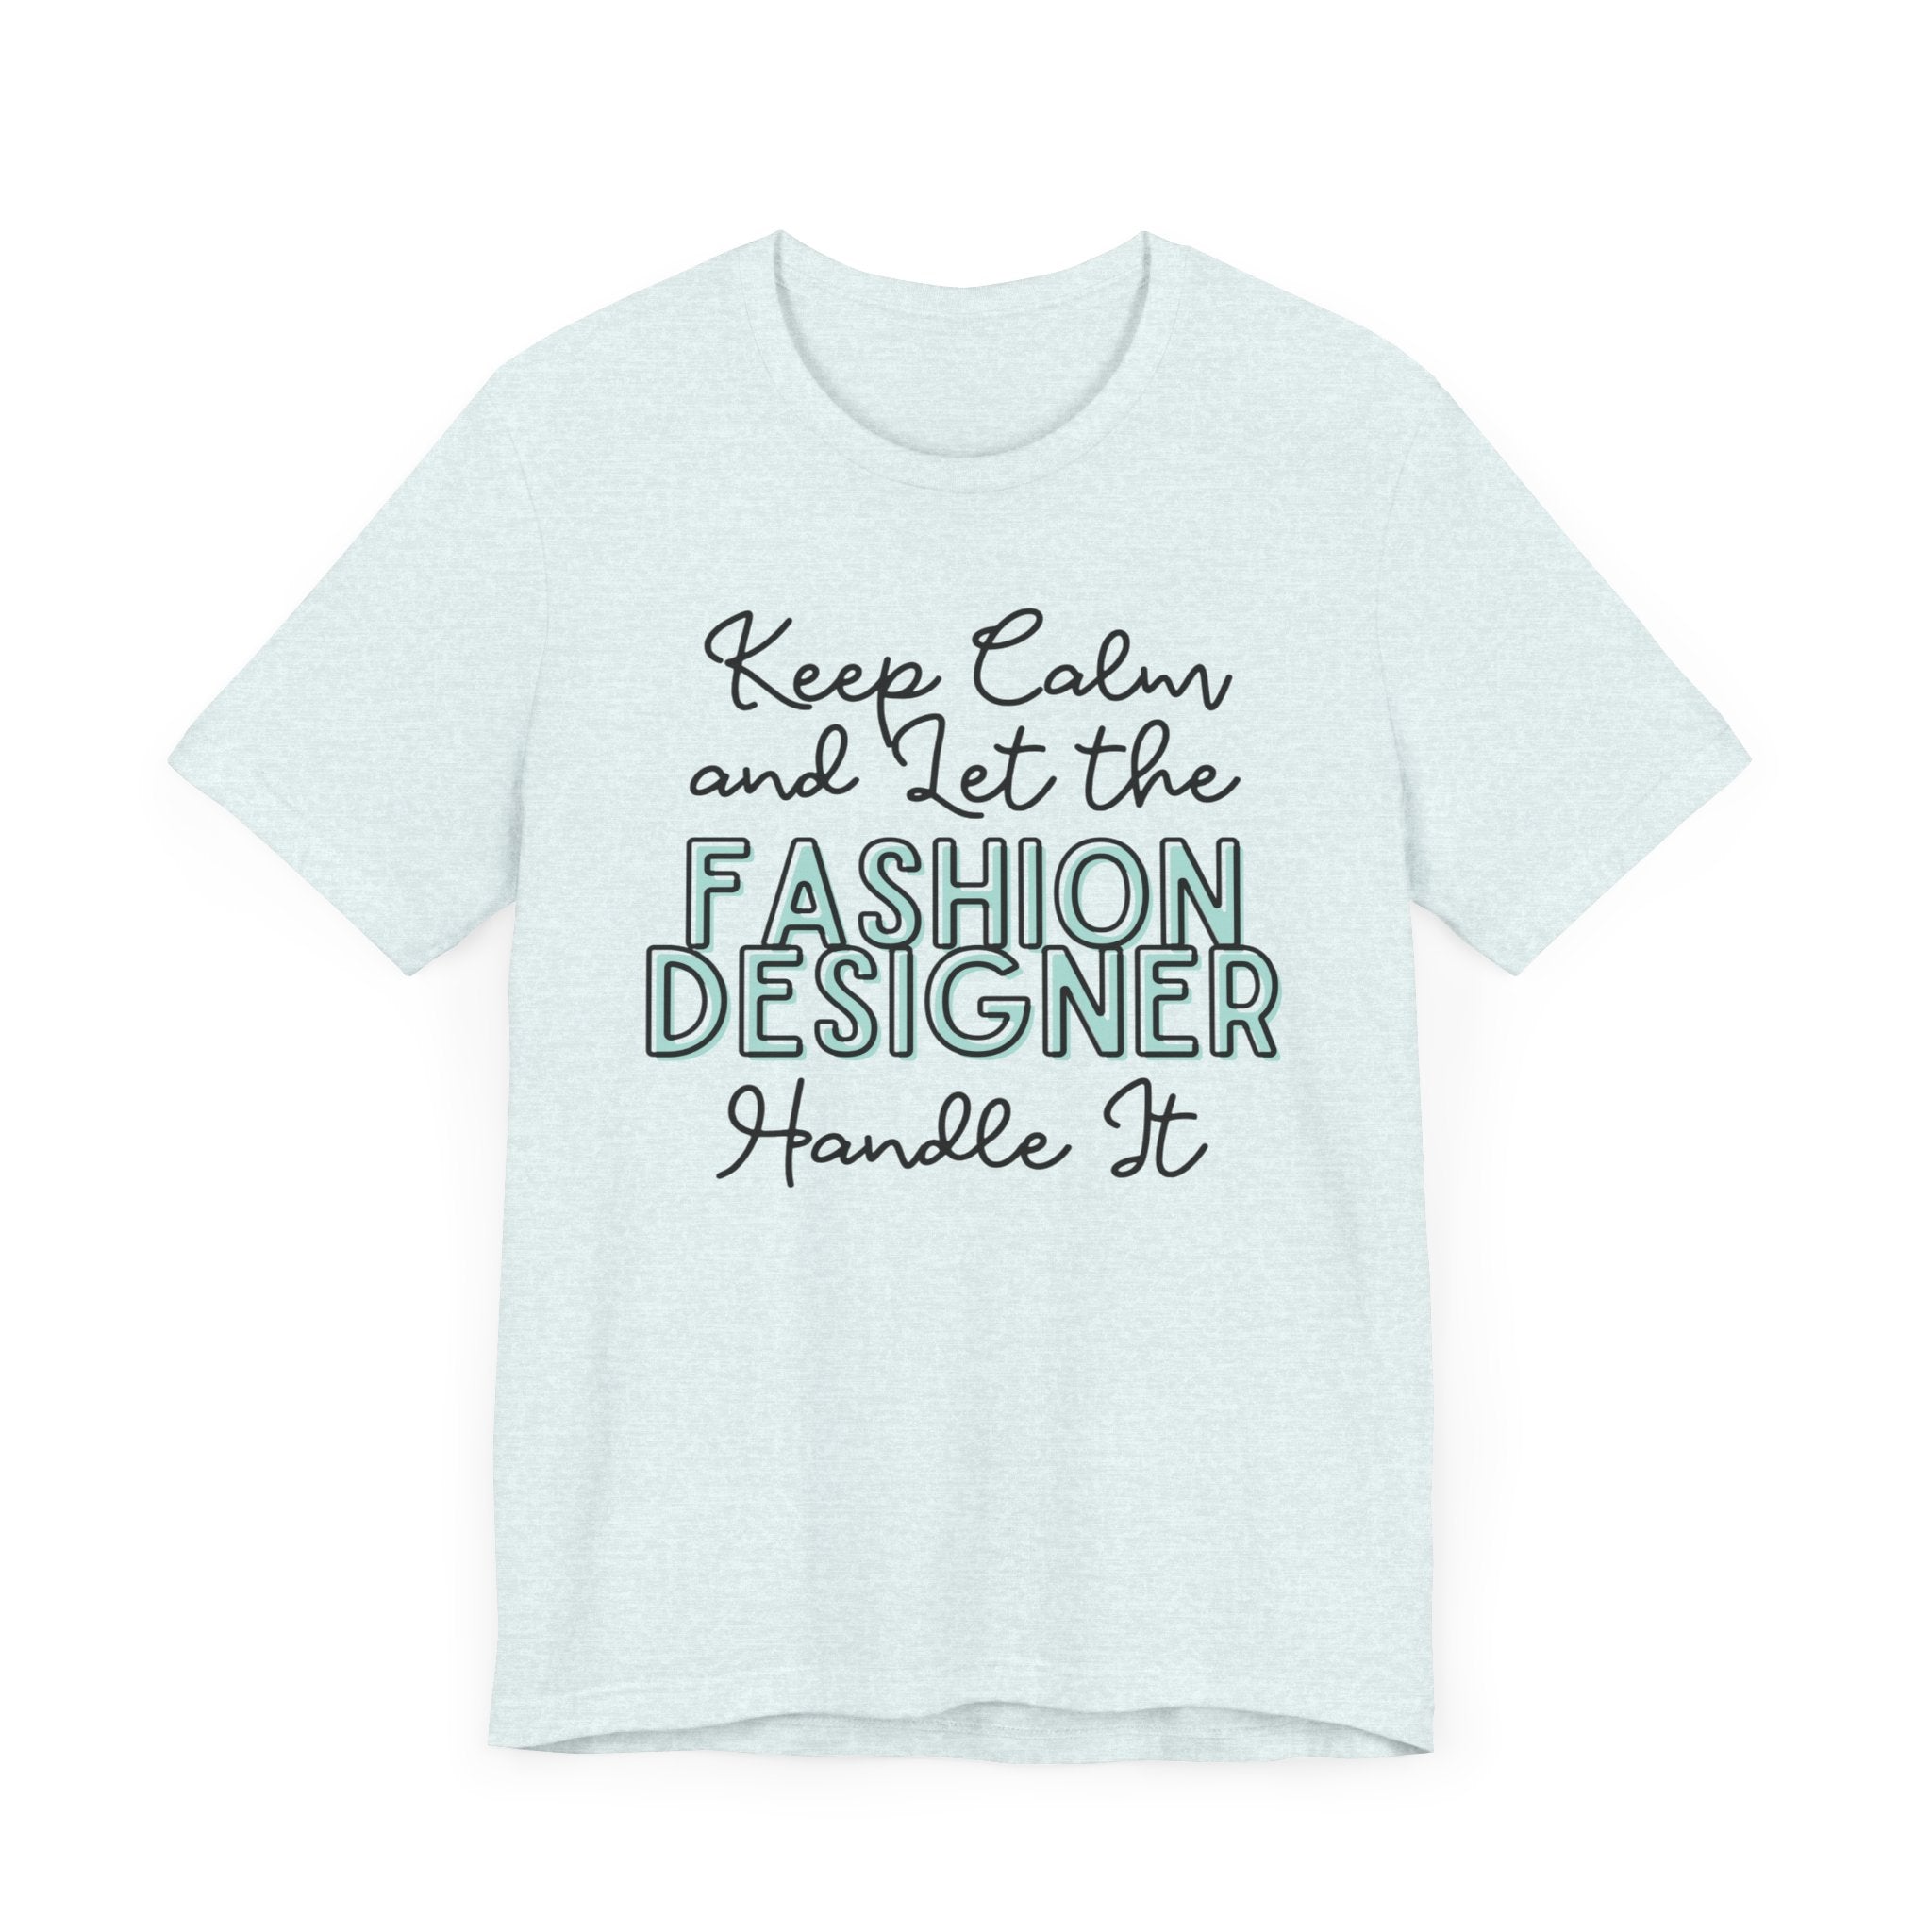 Keep Calm and let the Fashion Designer handle It - Jersey Short Sleeve Tee